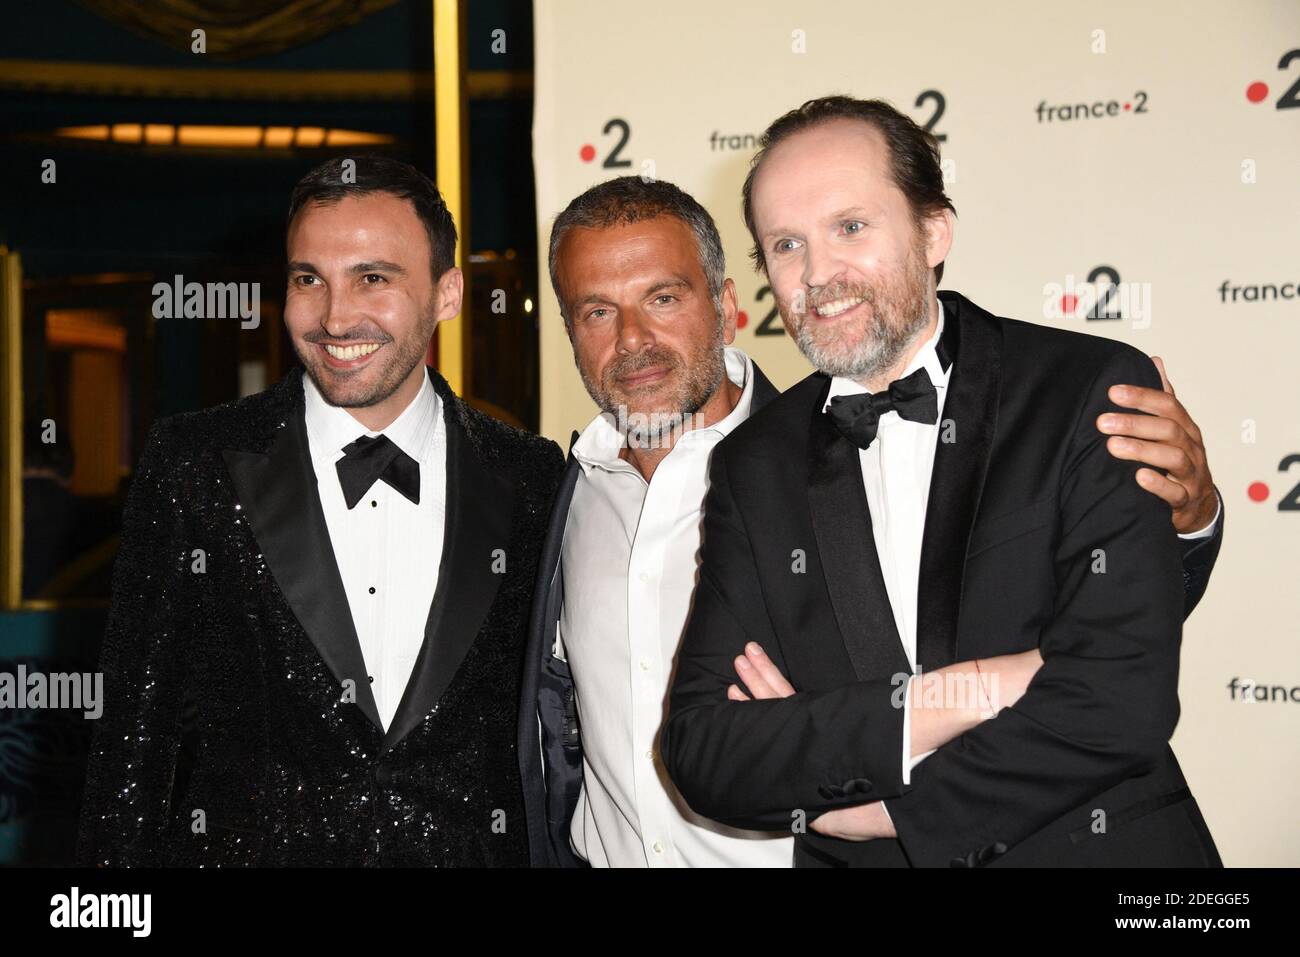 Thierry Lopez, Steve Suissa and Jean-Marc Dumontet arriving to the 31st  Molieres Awards Ceremony of French Theater held at the Folies Bergeres in  Paris, France, on May 13, 2019. Photo by Mireille